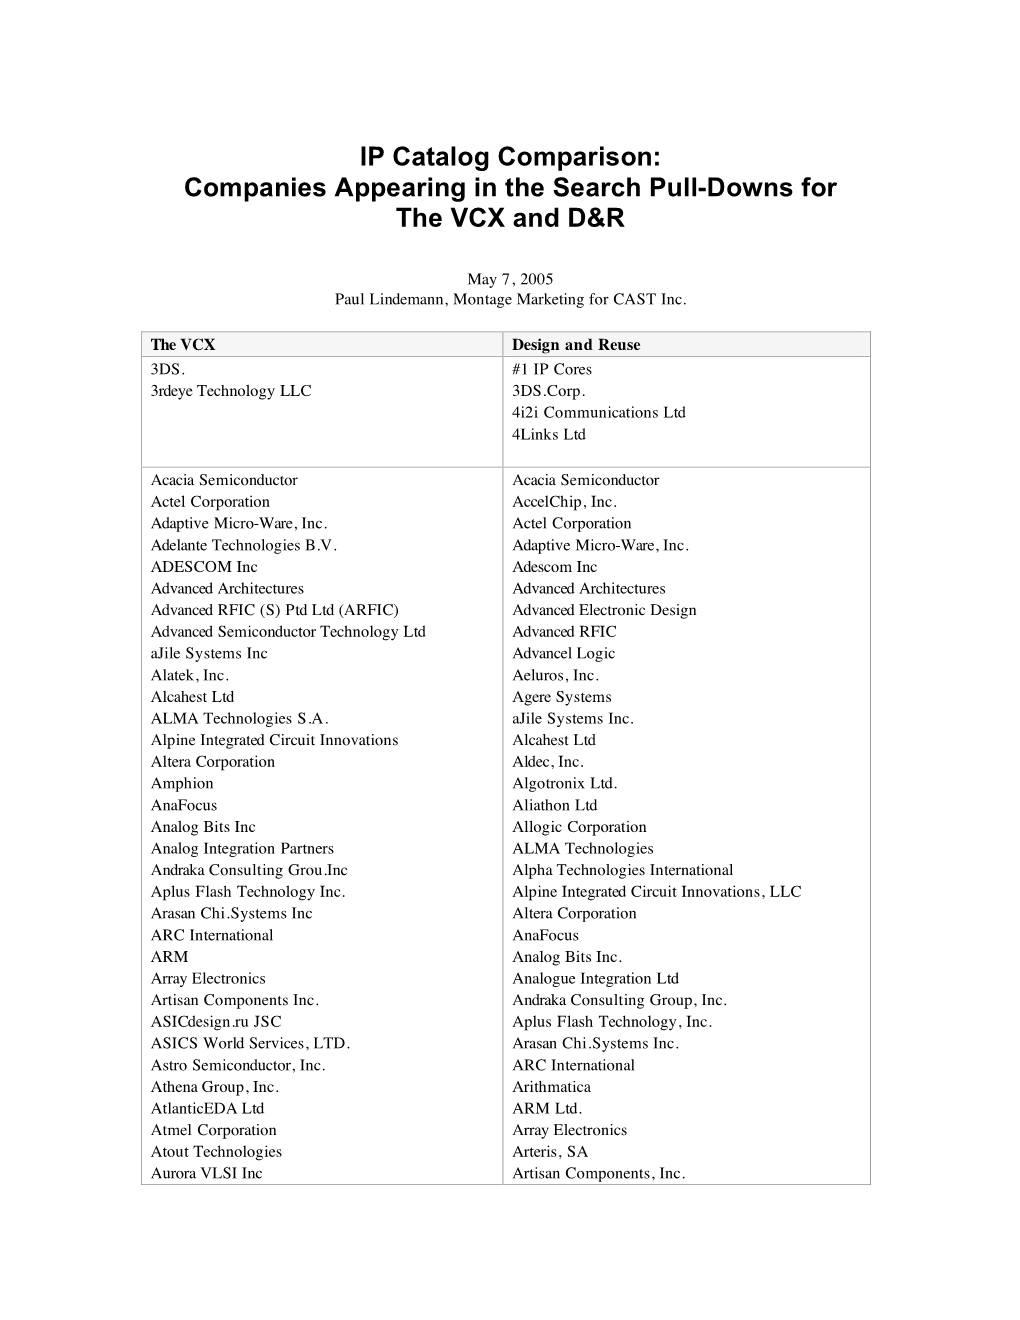 IP Catalog Comparison: Companies Appearing in the Search Pull-Downs for the VCX and D&R